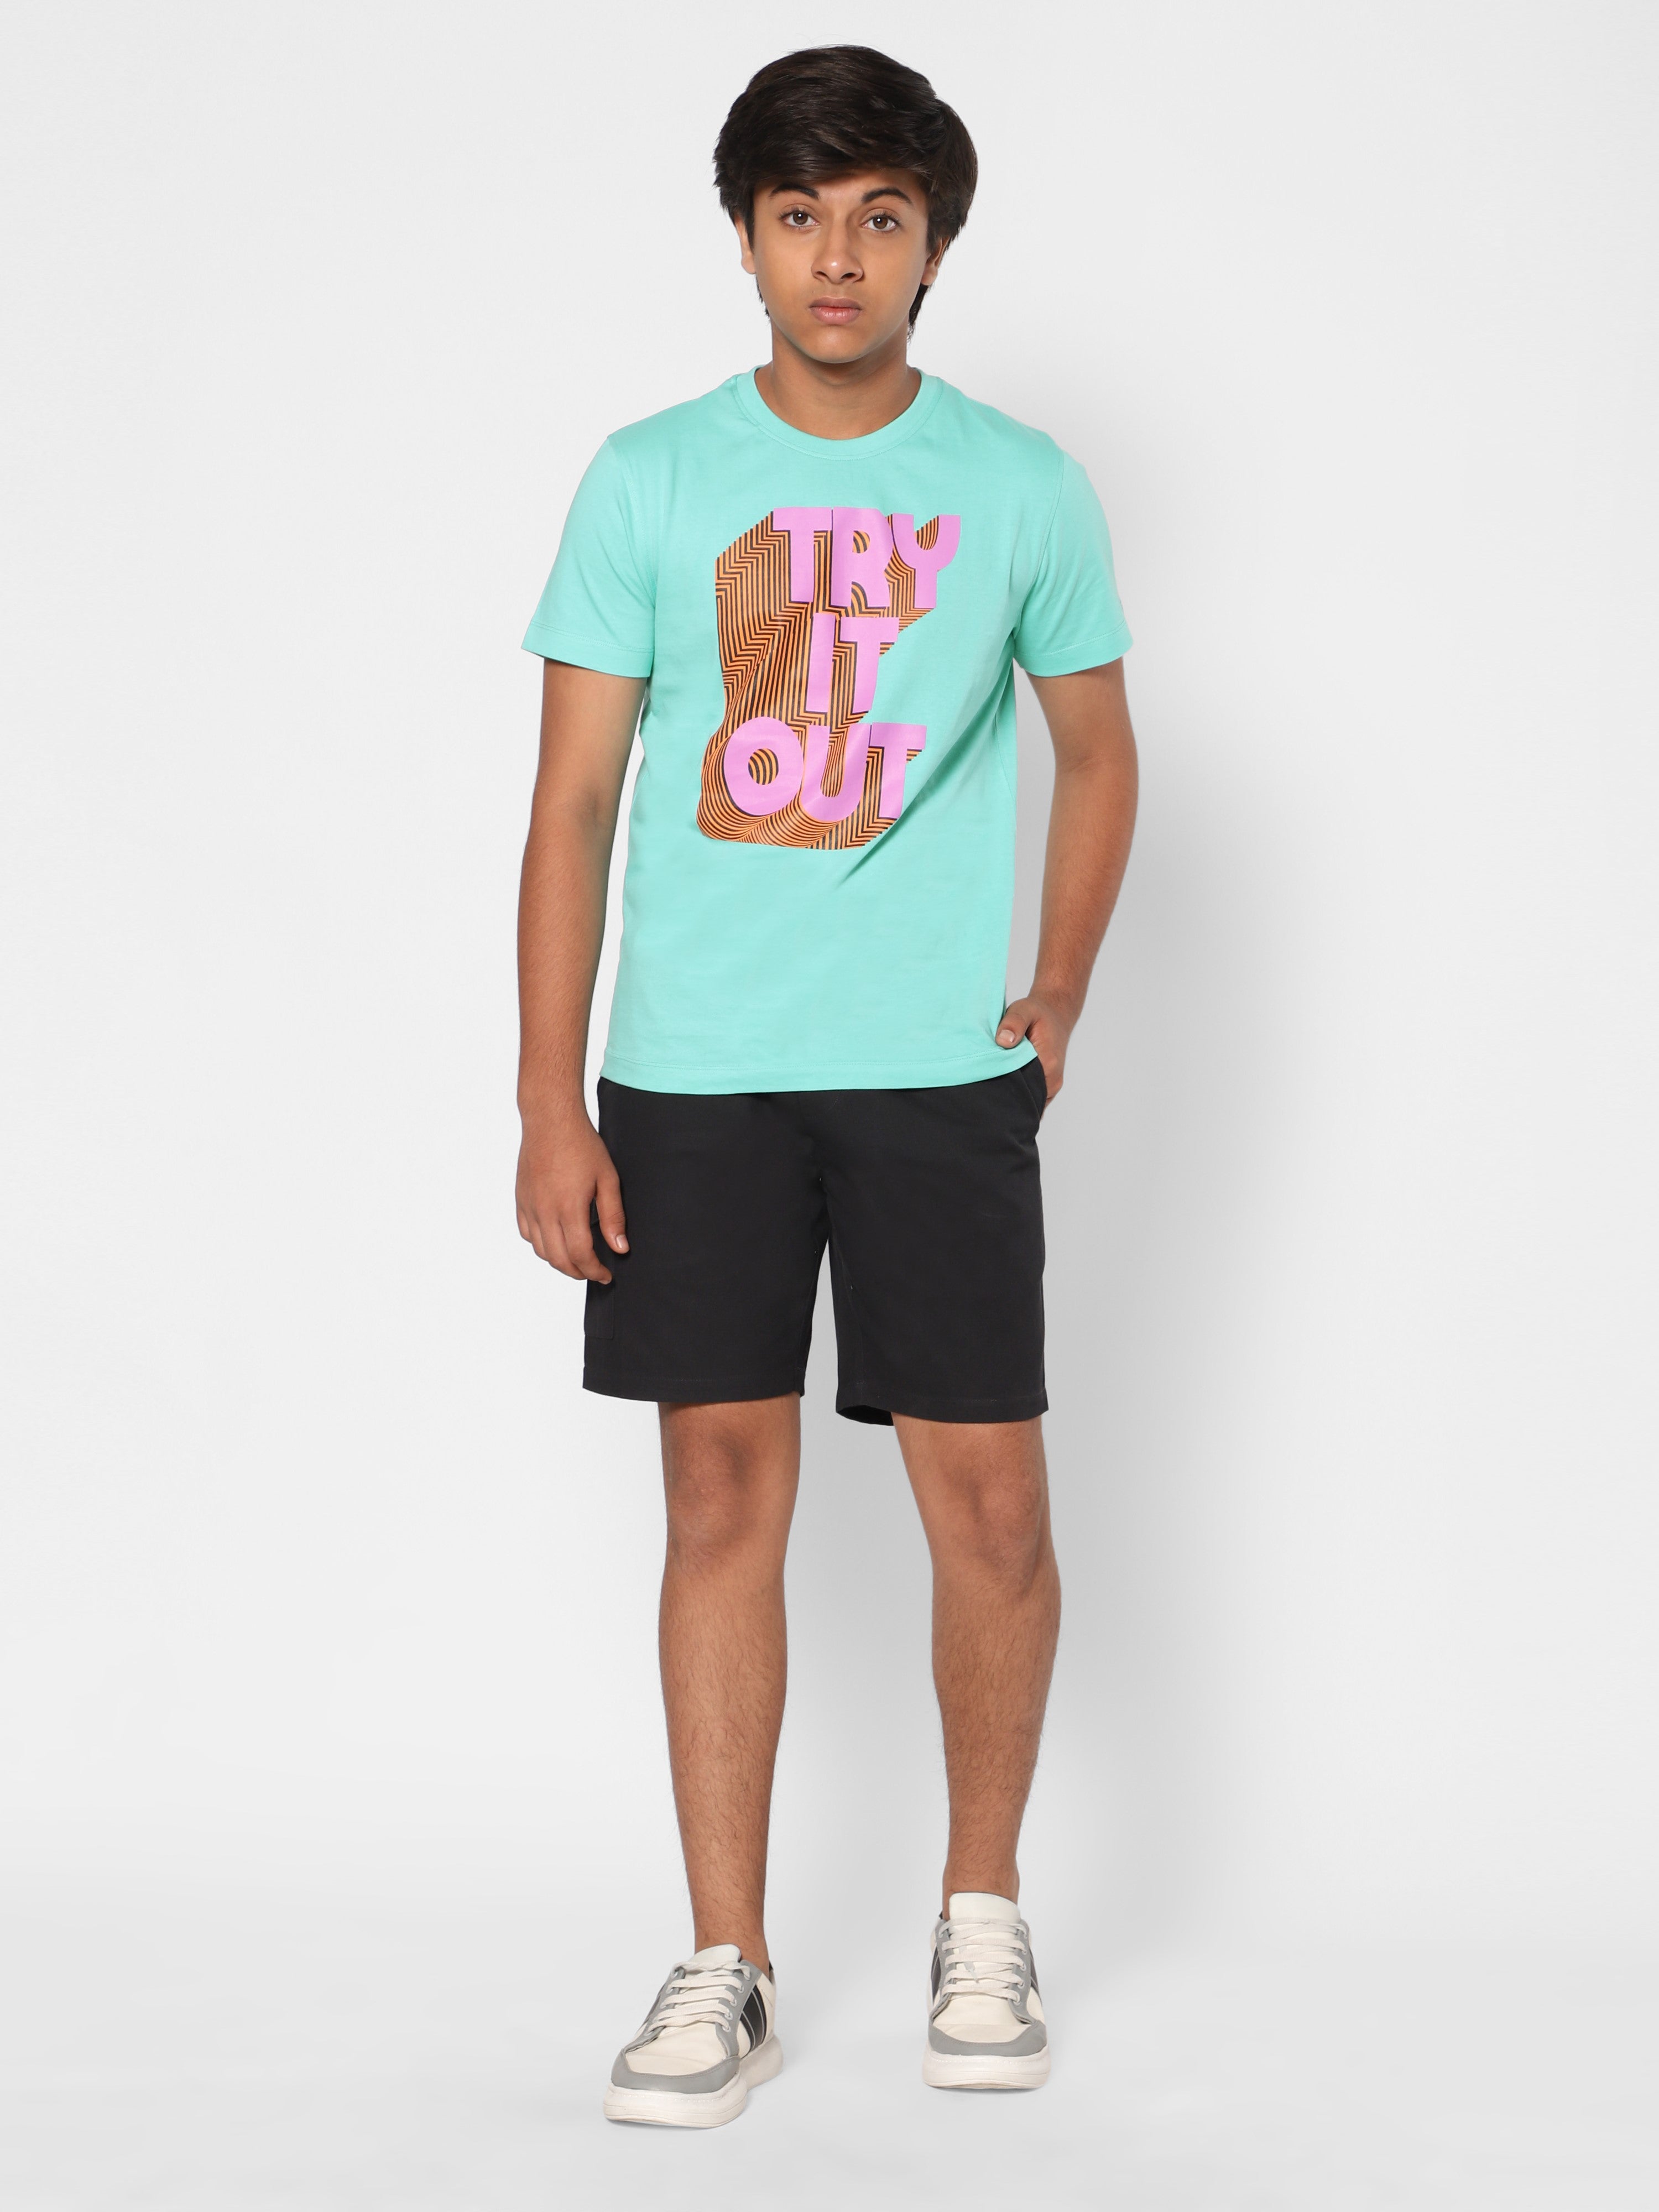 TeenTrums Unisex statement T-shirt - Try it out - Turquoise